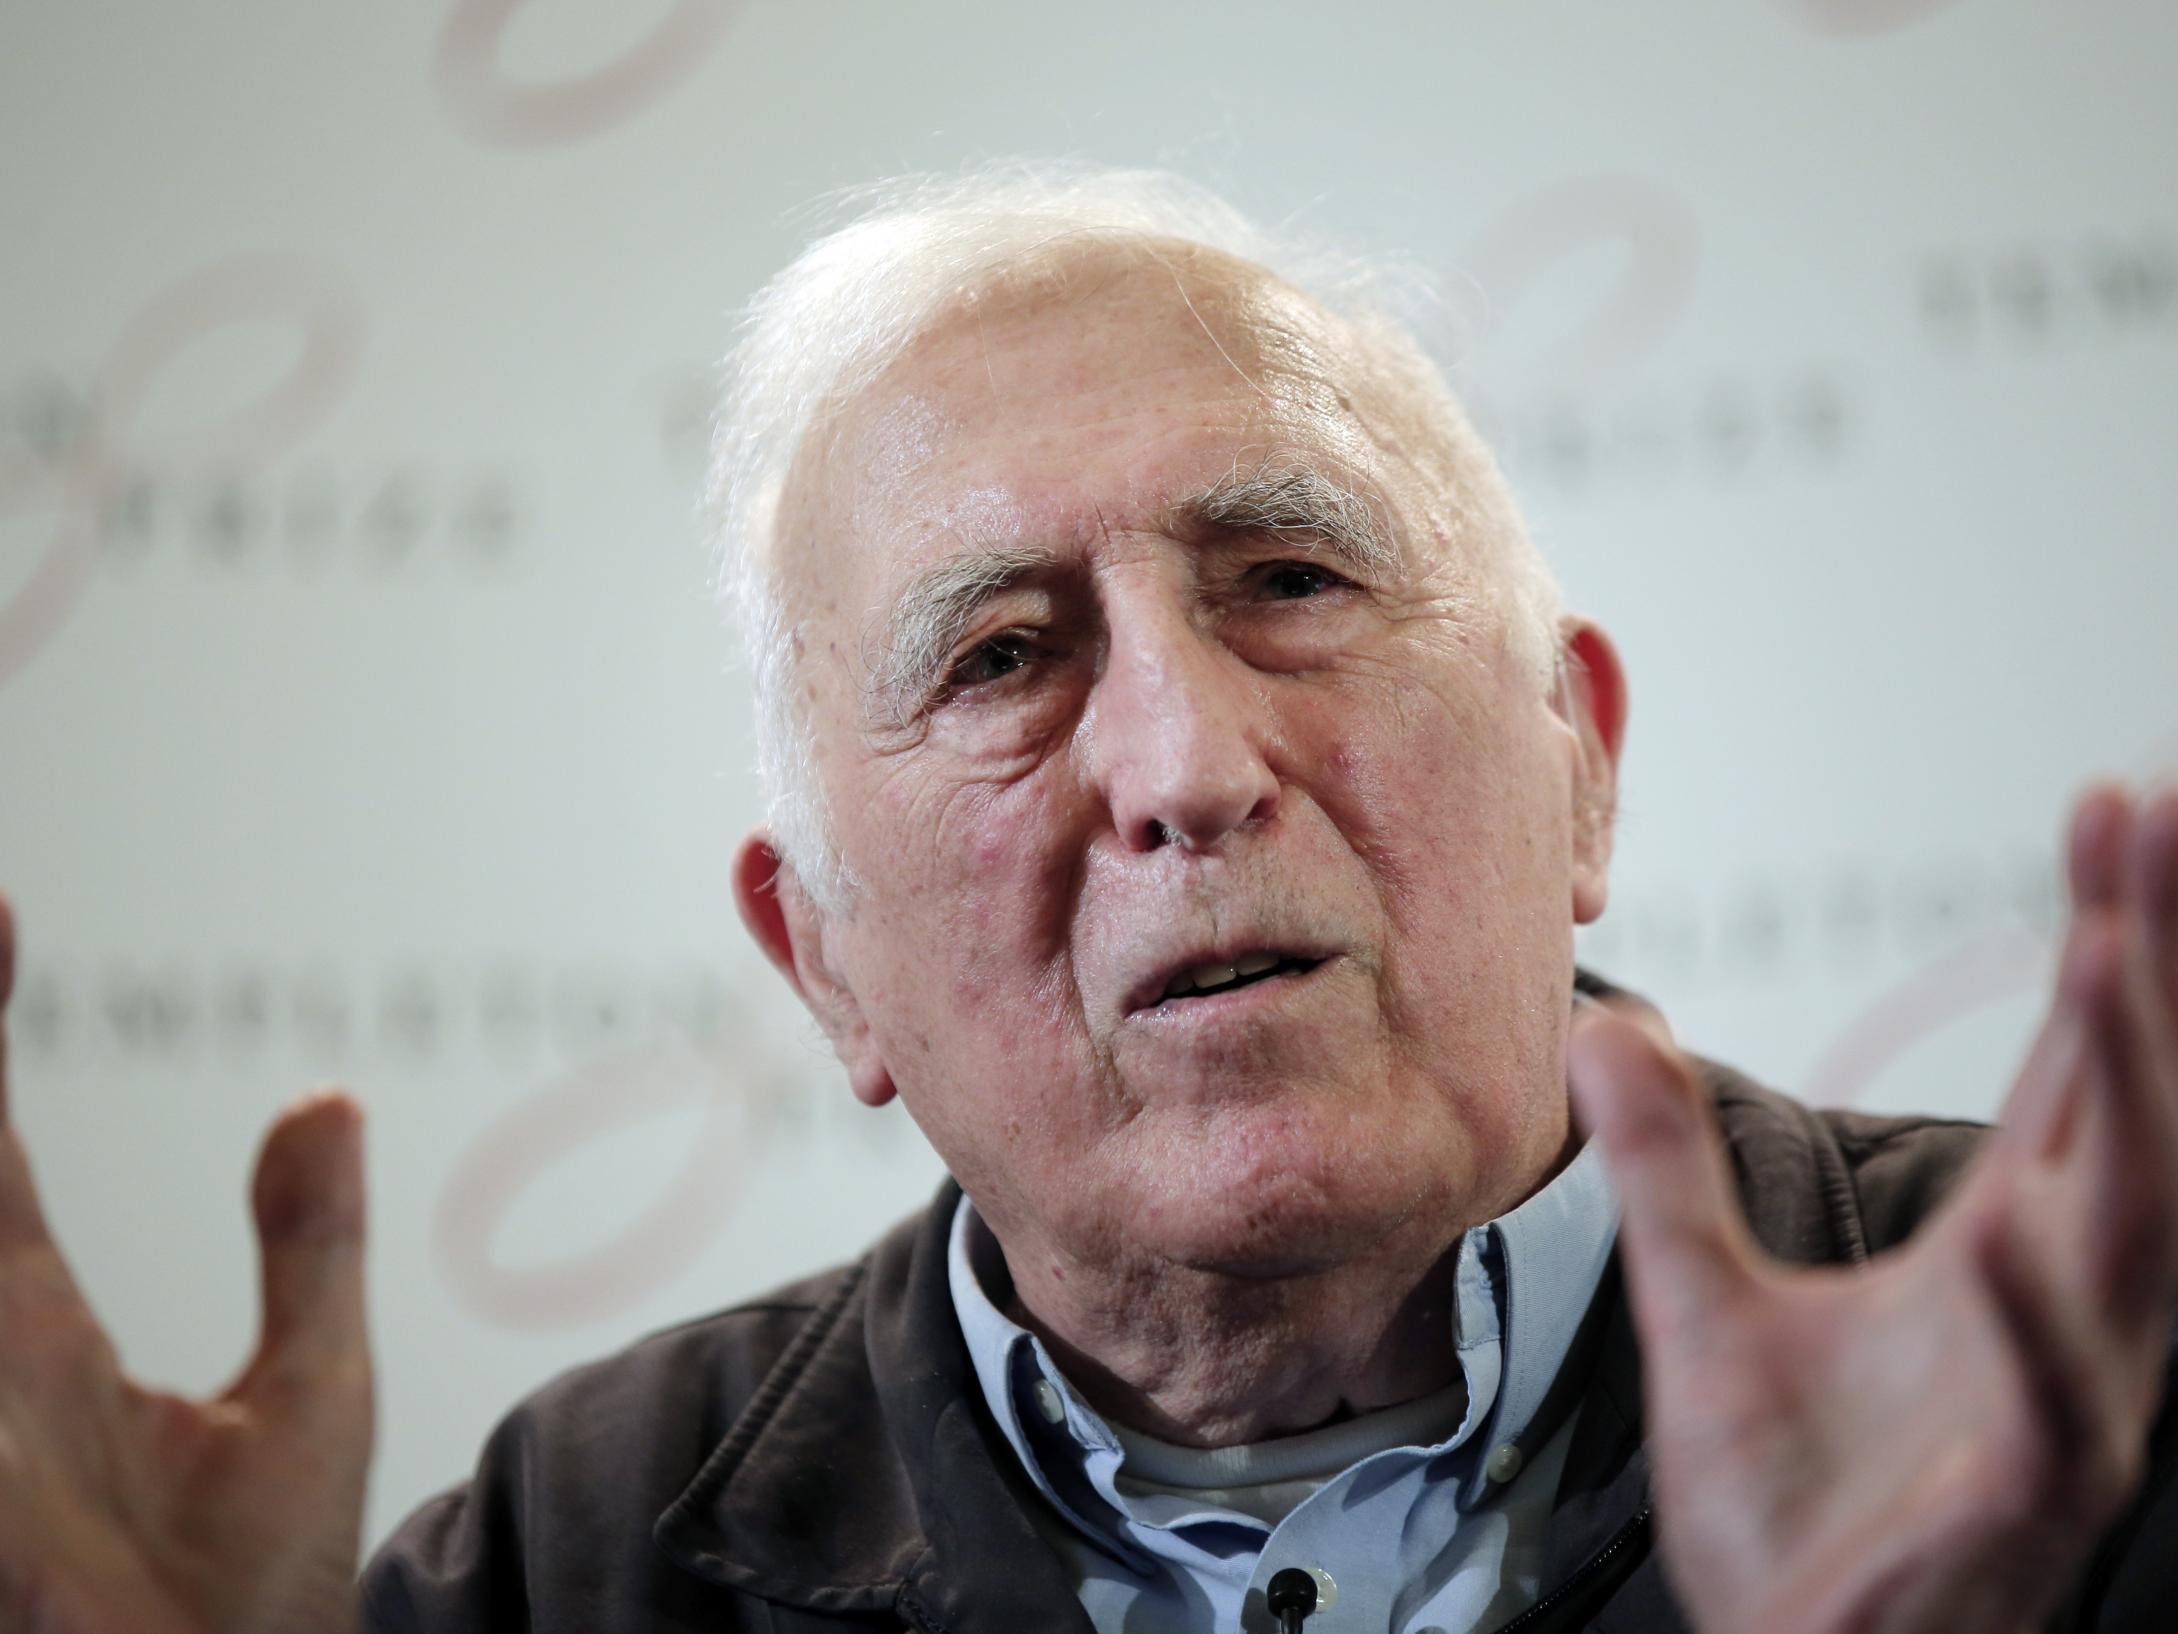 Jean Vanier founded leading disability charity L’Arche 1964